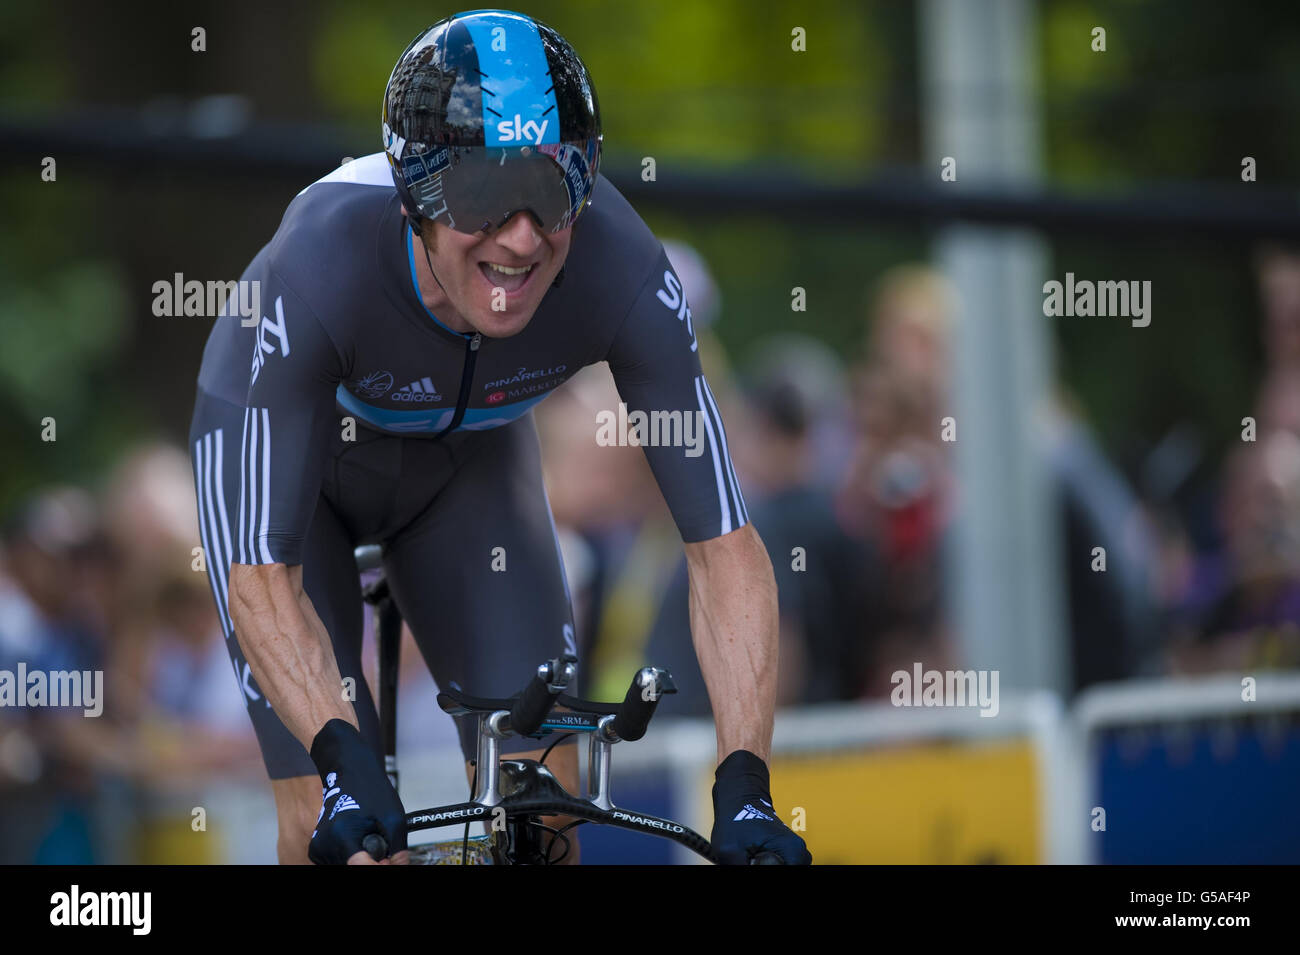 Bradley Wiggins during the Prologue Stage of the 2012 Tour de France in Liege, Belgium. Stock Photo